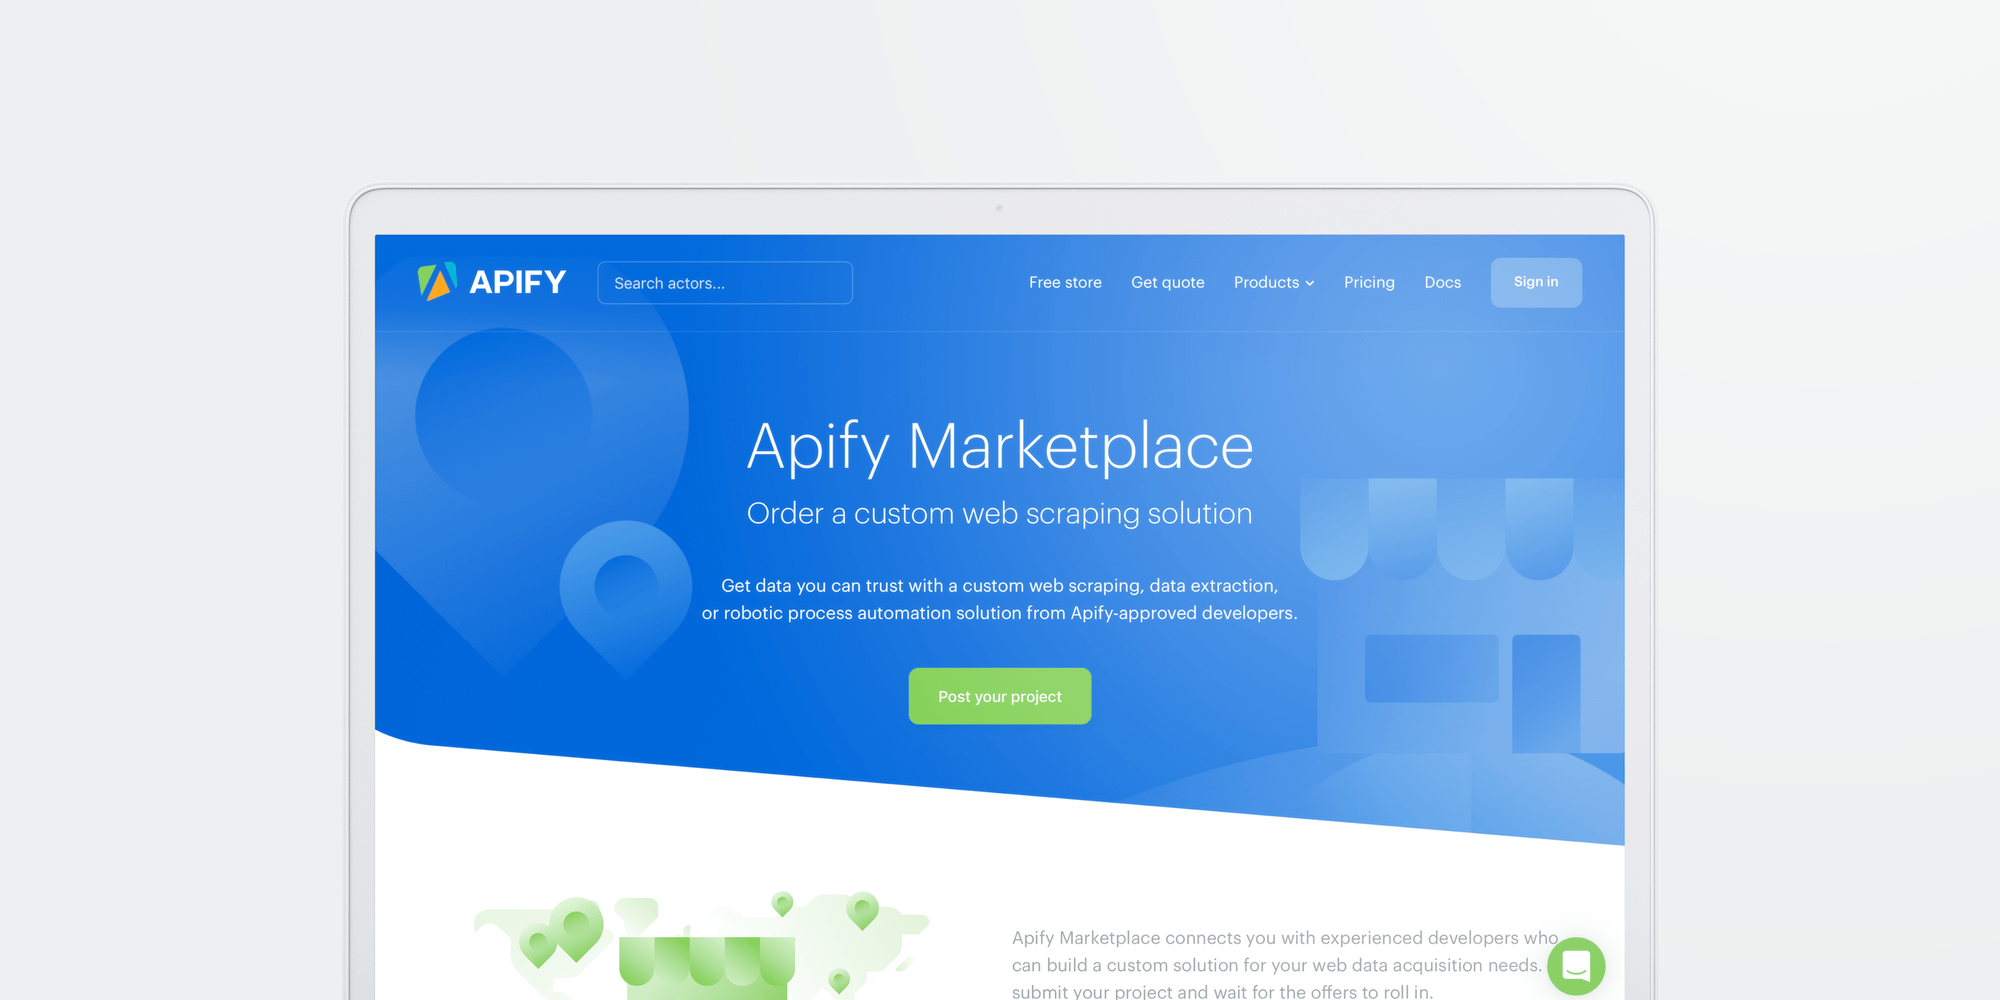 Get custom web scraping solutions from certified developers on Apify Marketplace